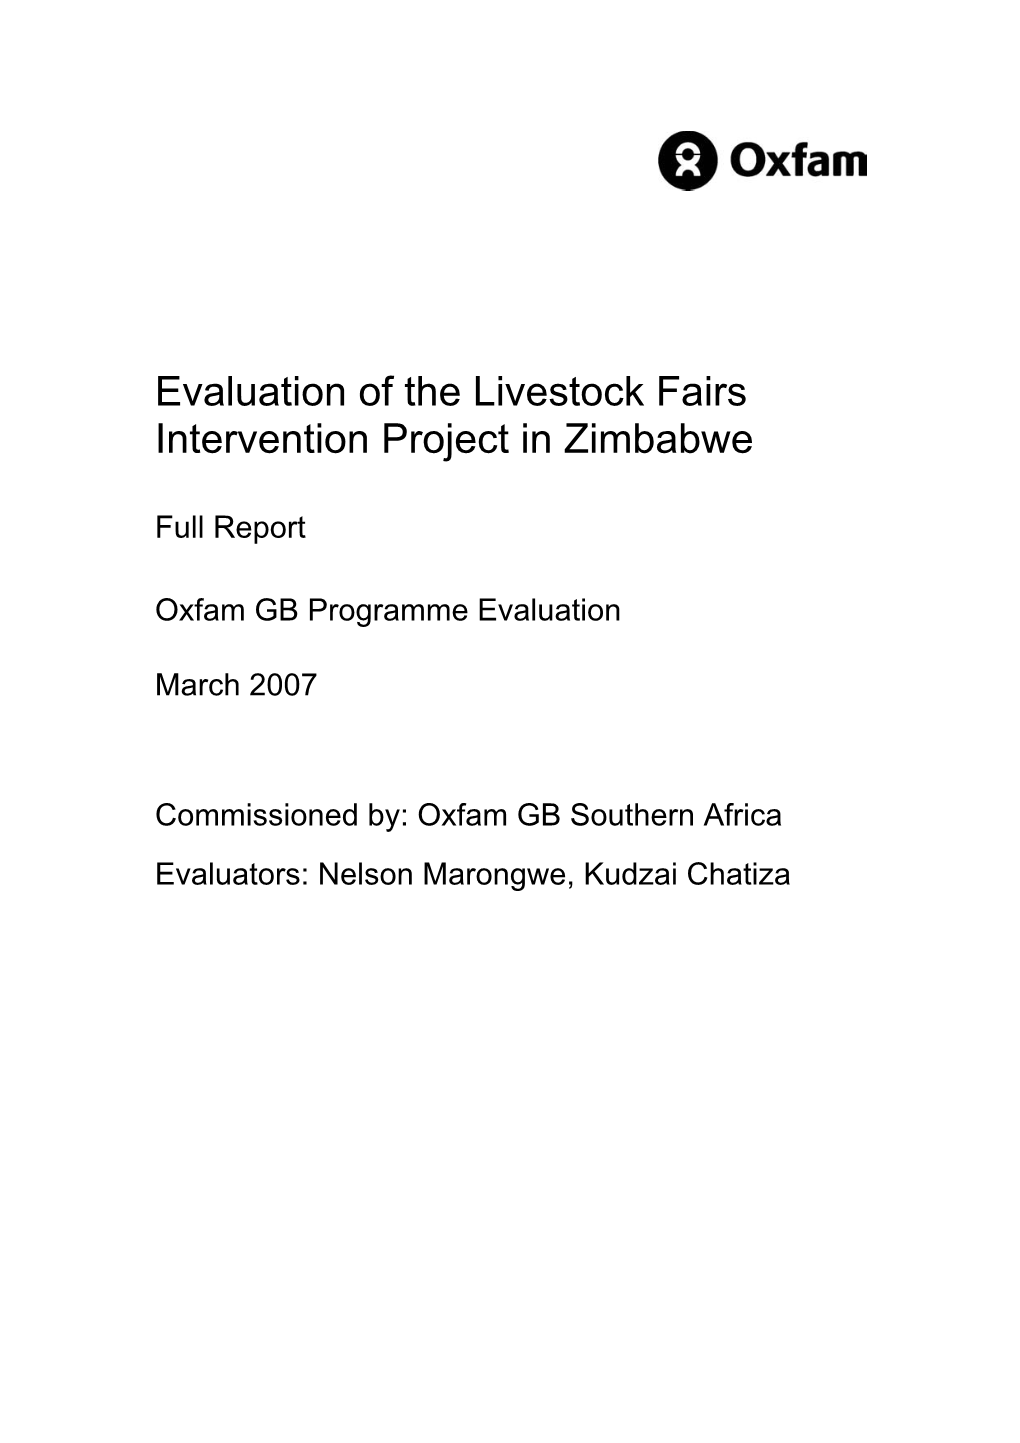 Evaluation of the Livestock Fairs Intervention Project in Zimbabwe